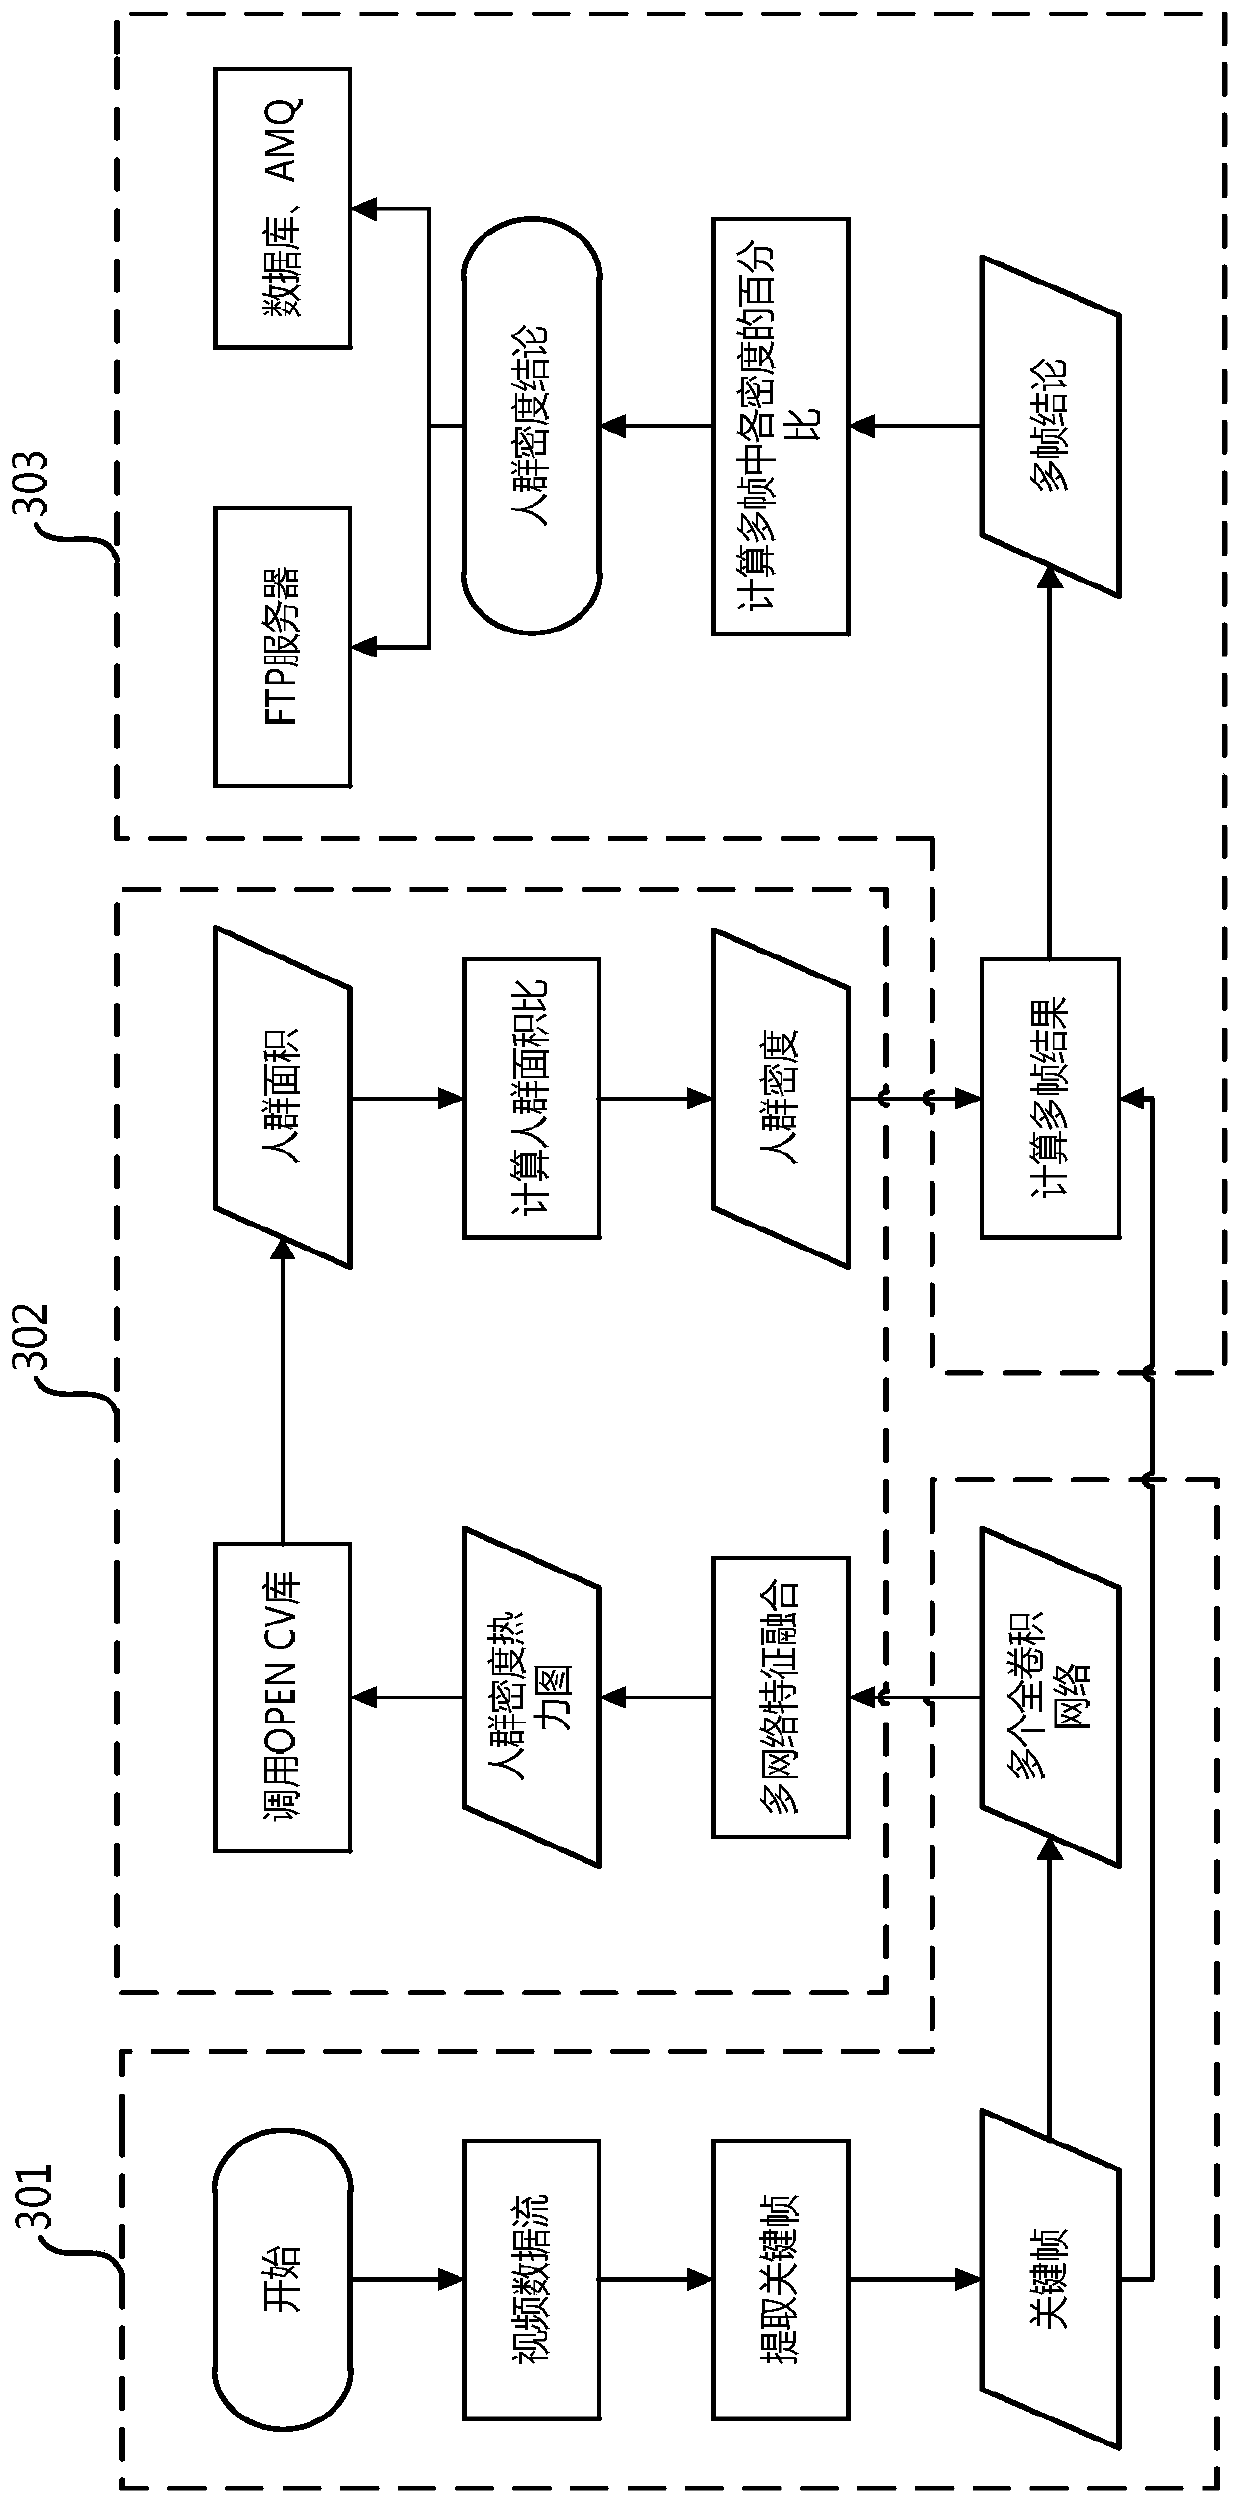 Intelligent building management and control system for realizing behavior recognition based on intelligent video analysis algorithm